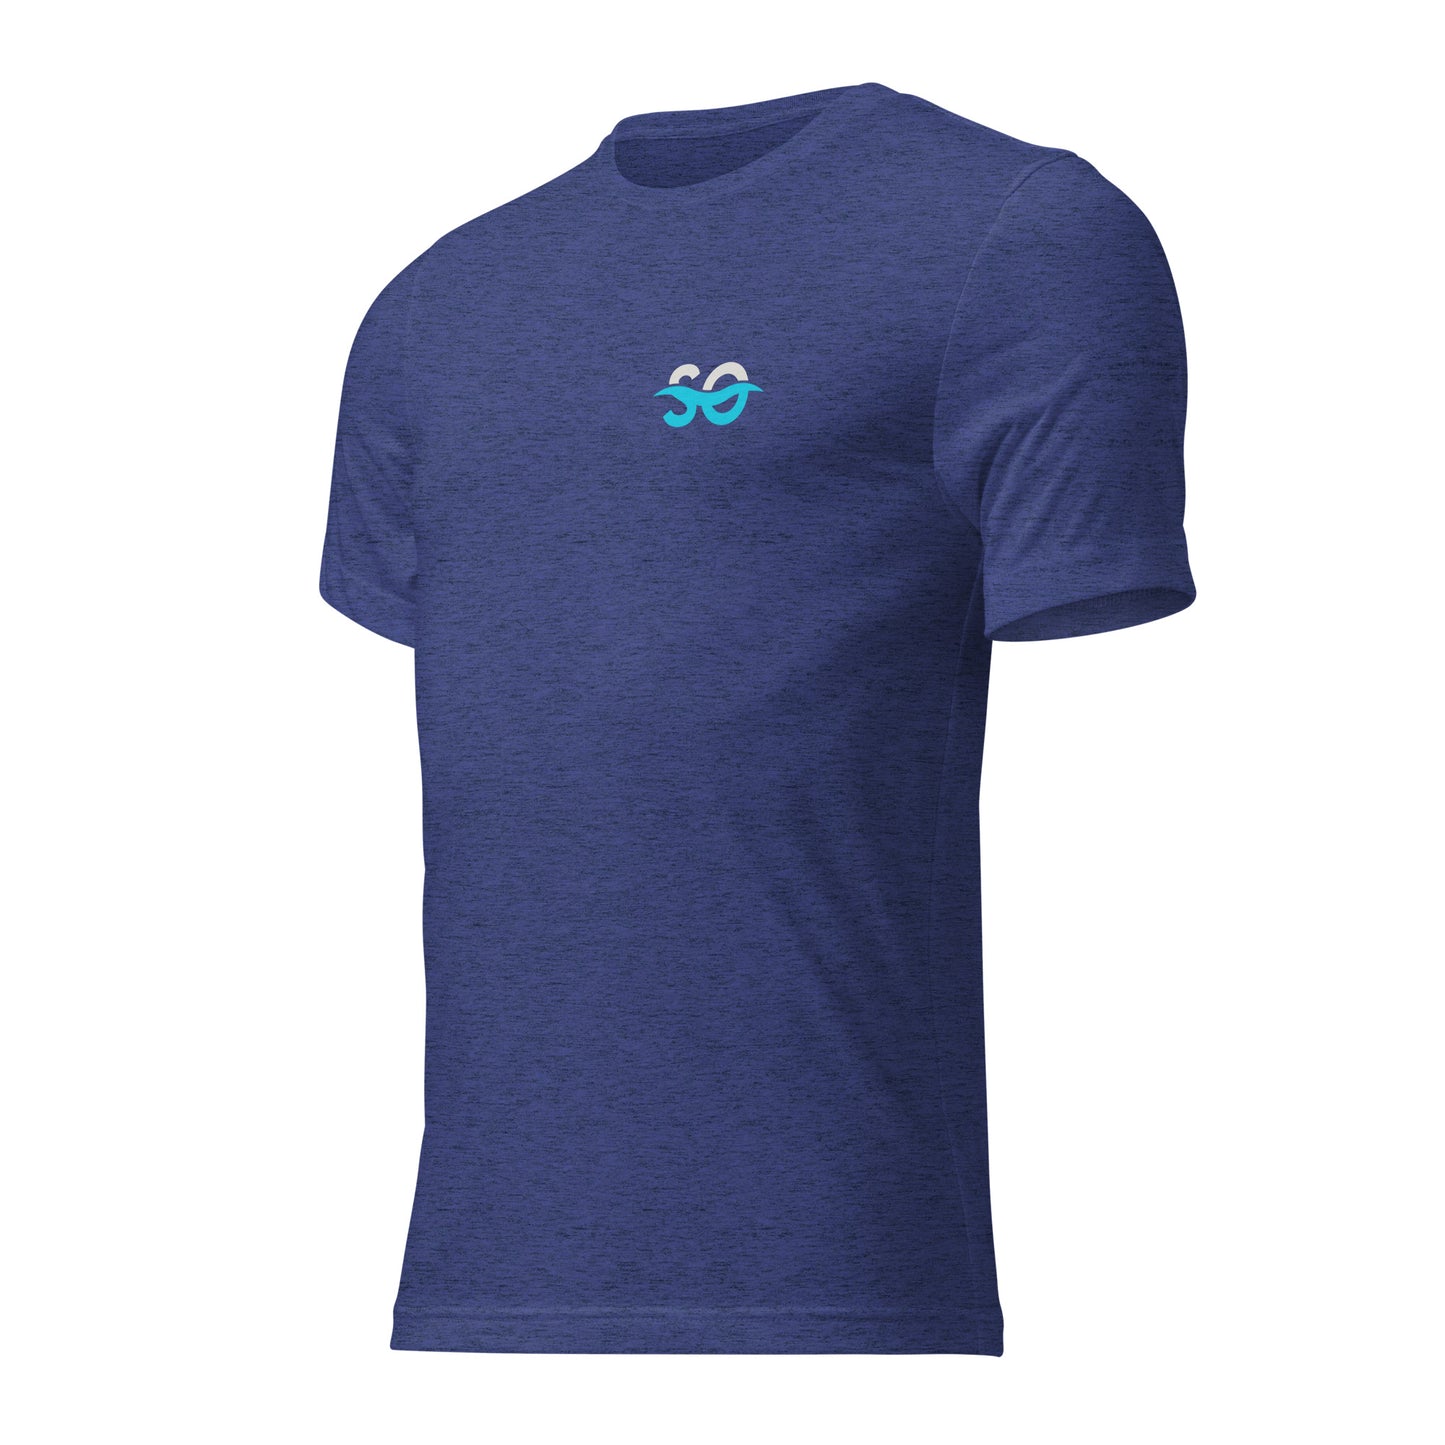 a blue t - shirt with the number 50 printed on it